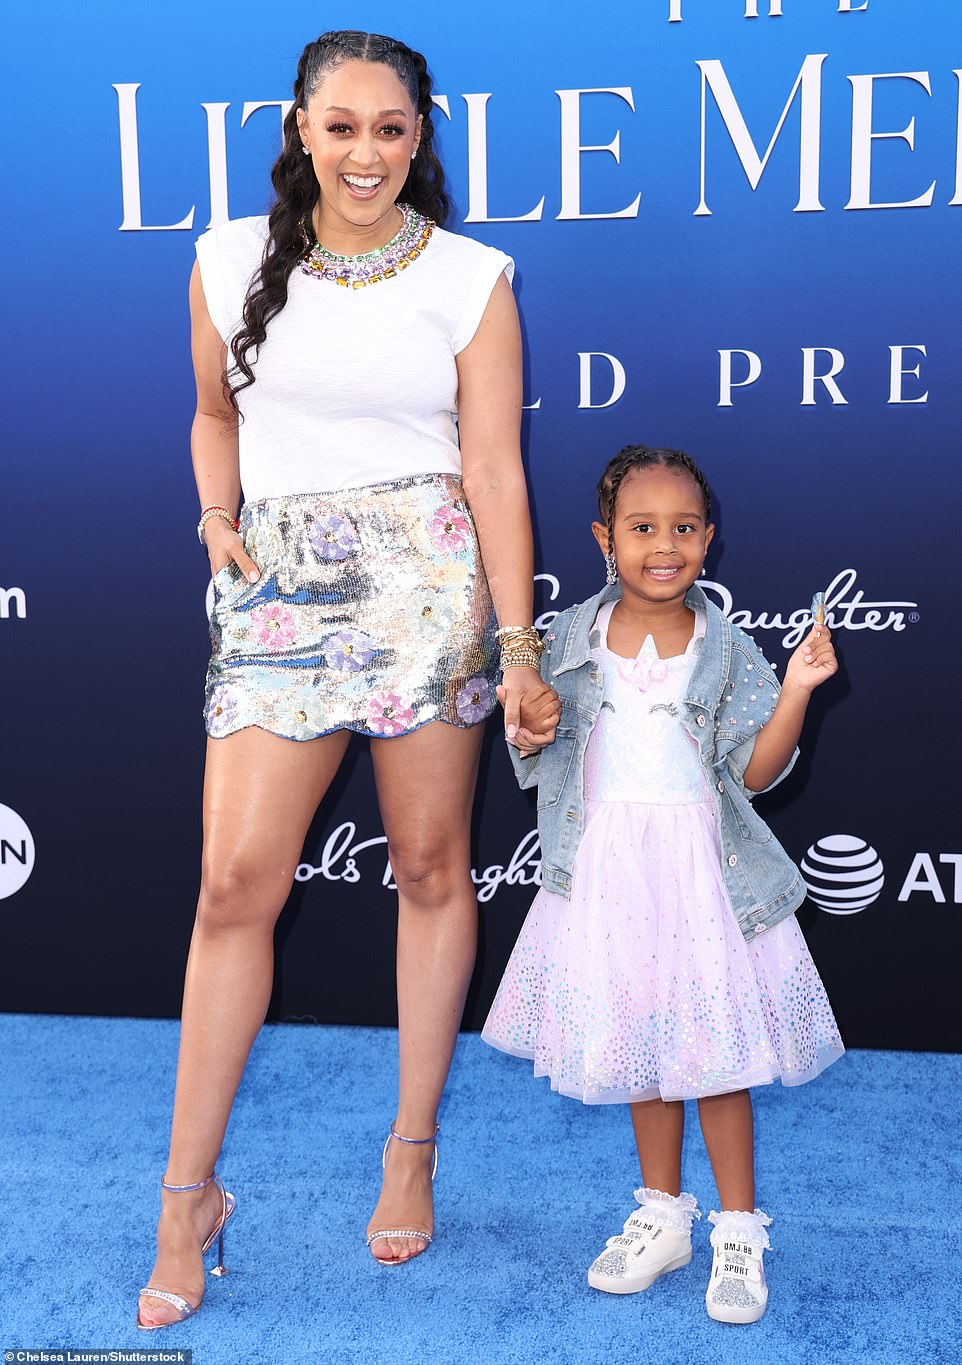 Tia Mowry also showed up with her adorable daughter in tow as the pair enjoyed some quality time together at the kid-friendly event